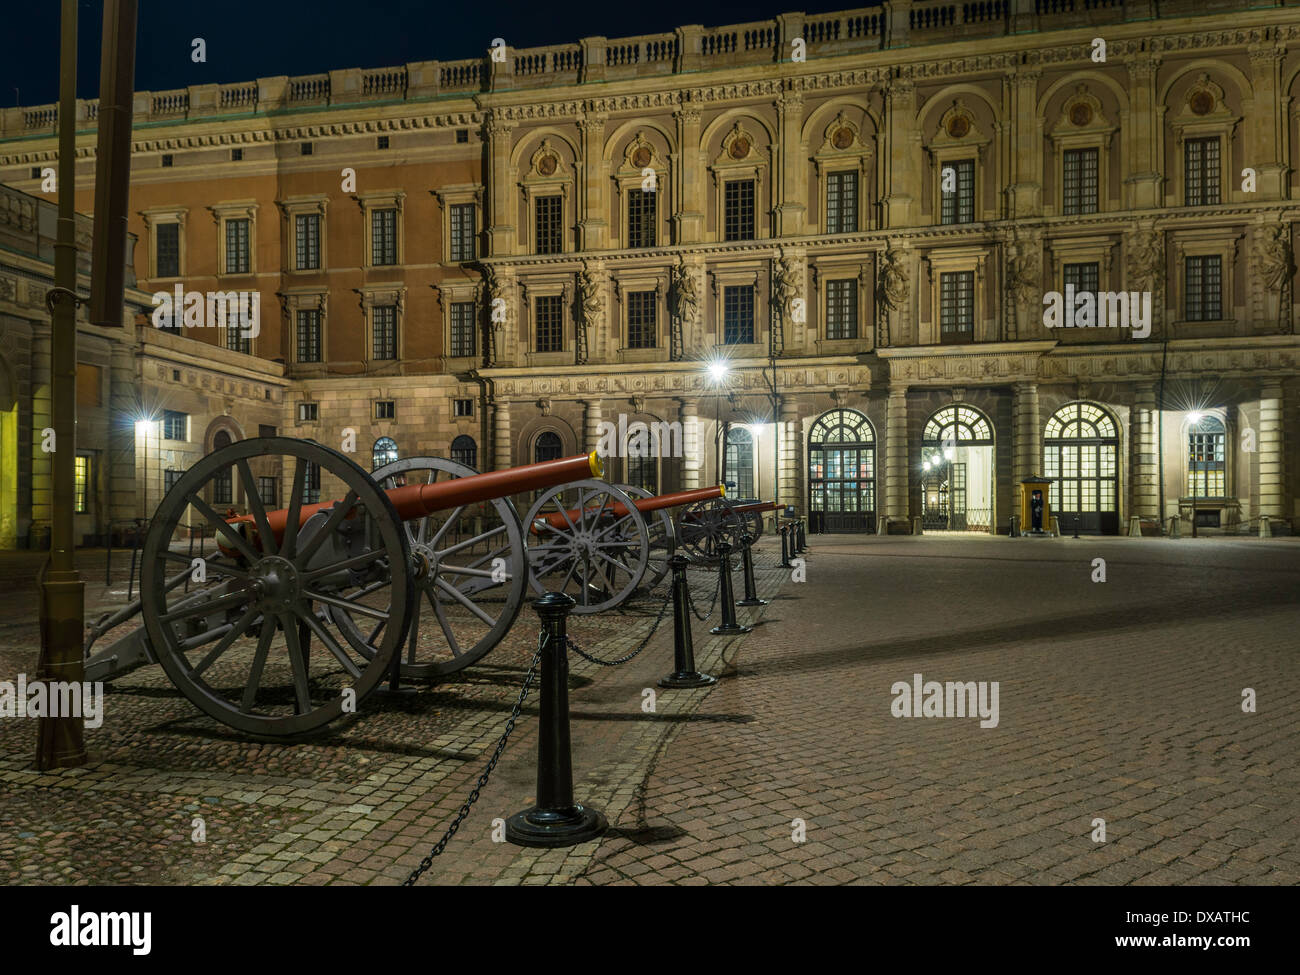 Evening view of cannons in outer courtyard ('Yttre Borggården') of the Royal Palace ('Kungliga slottet'), Stockholm, Sweden. Stock Photo